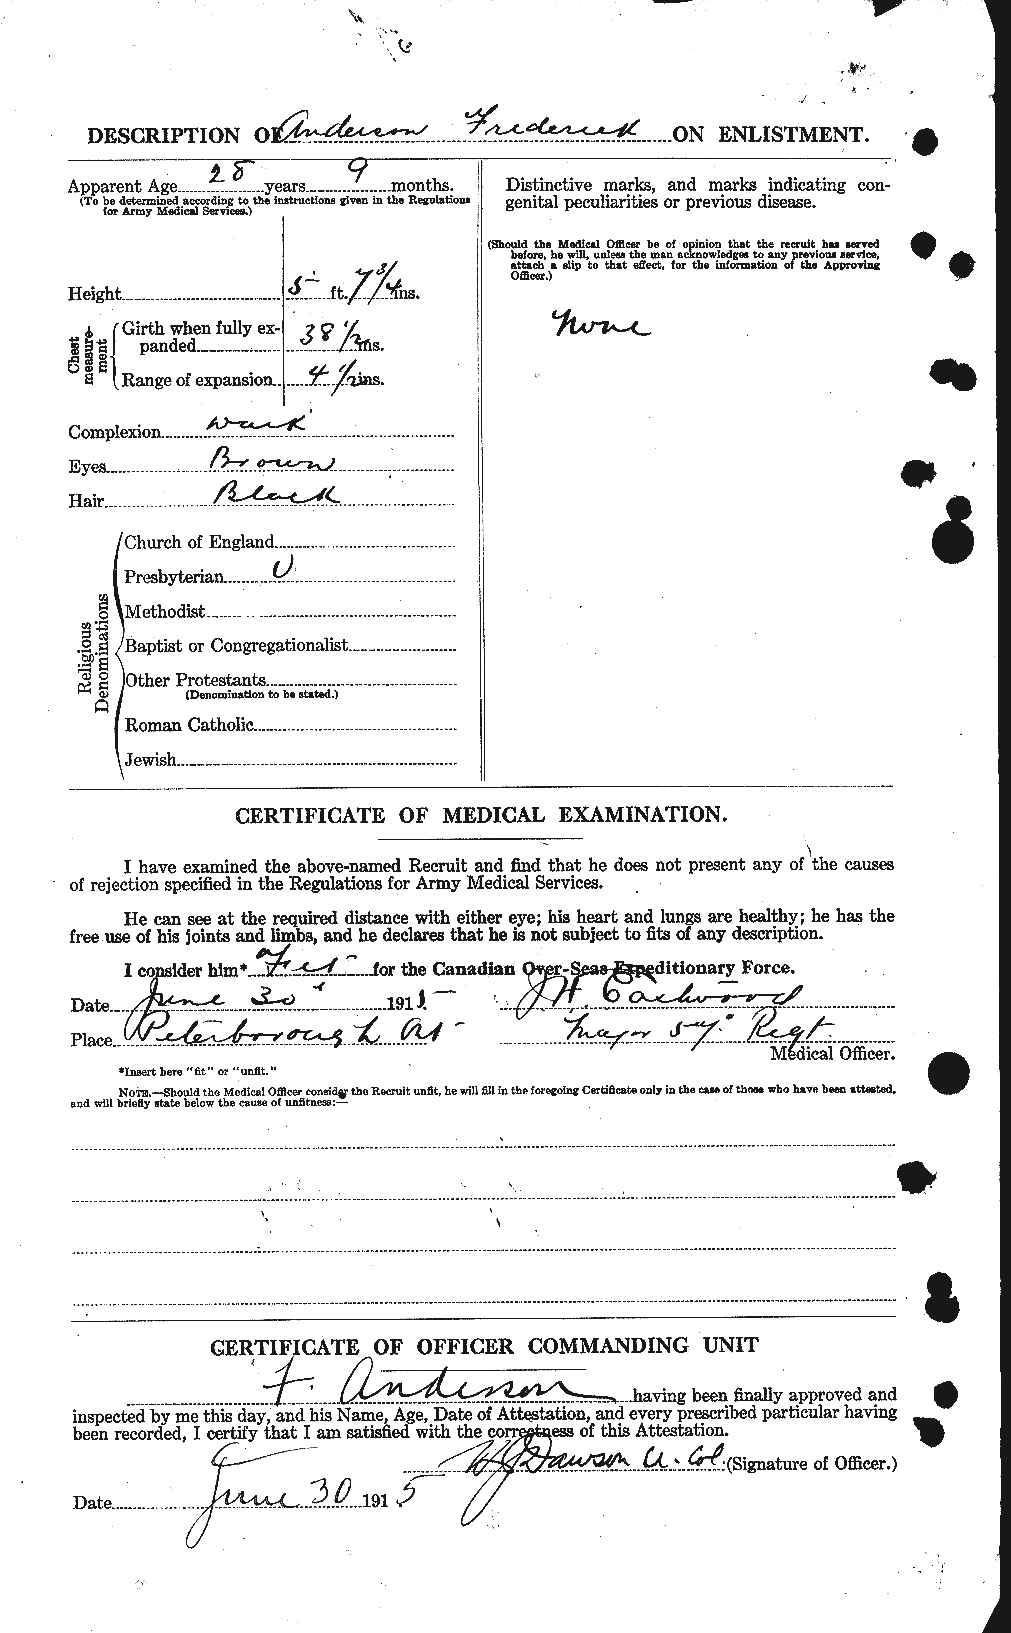 Personnel Records of the First World War - CEF 209827b